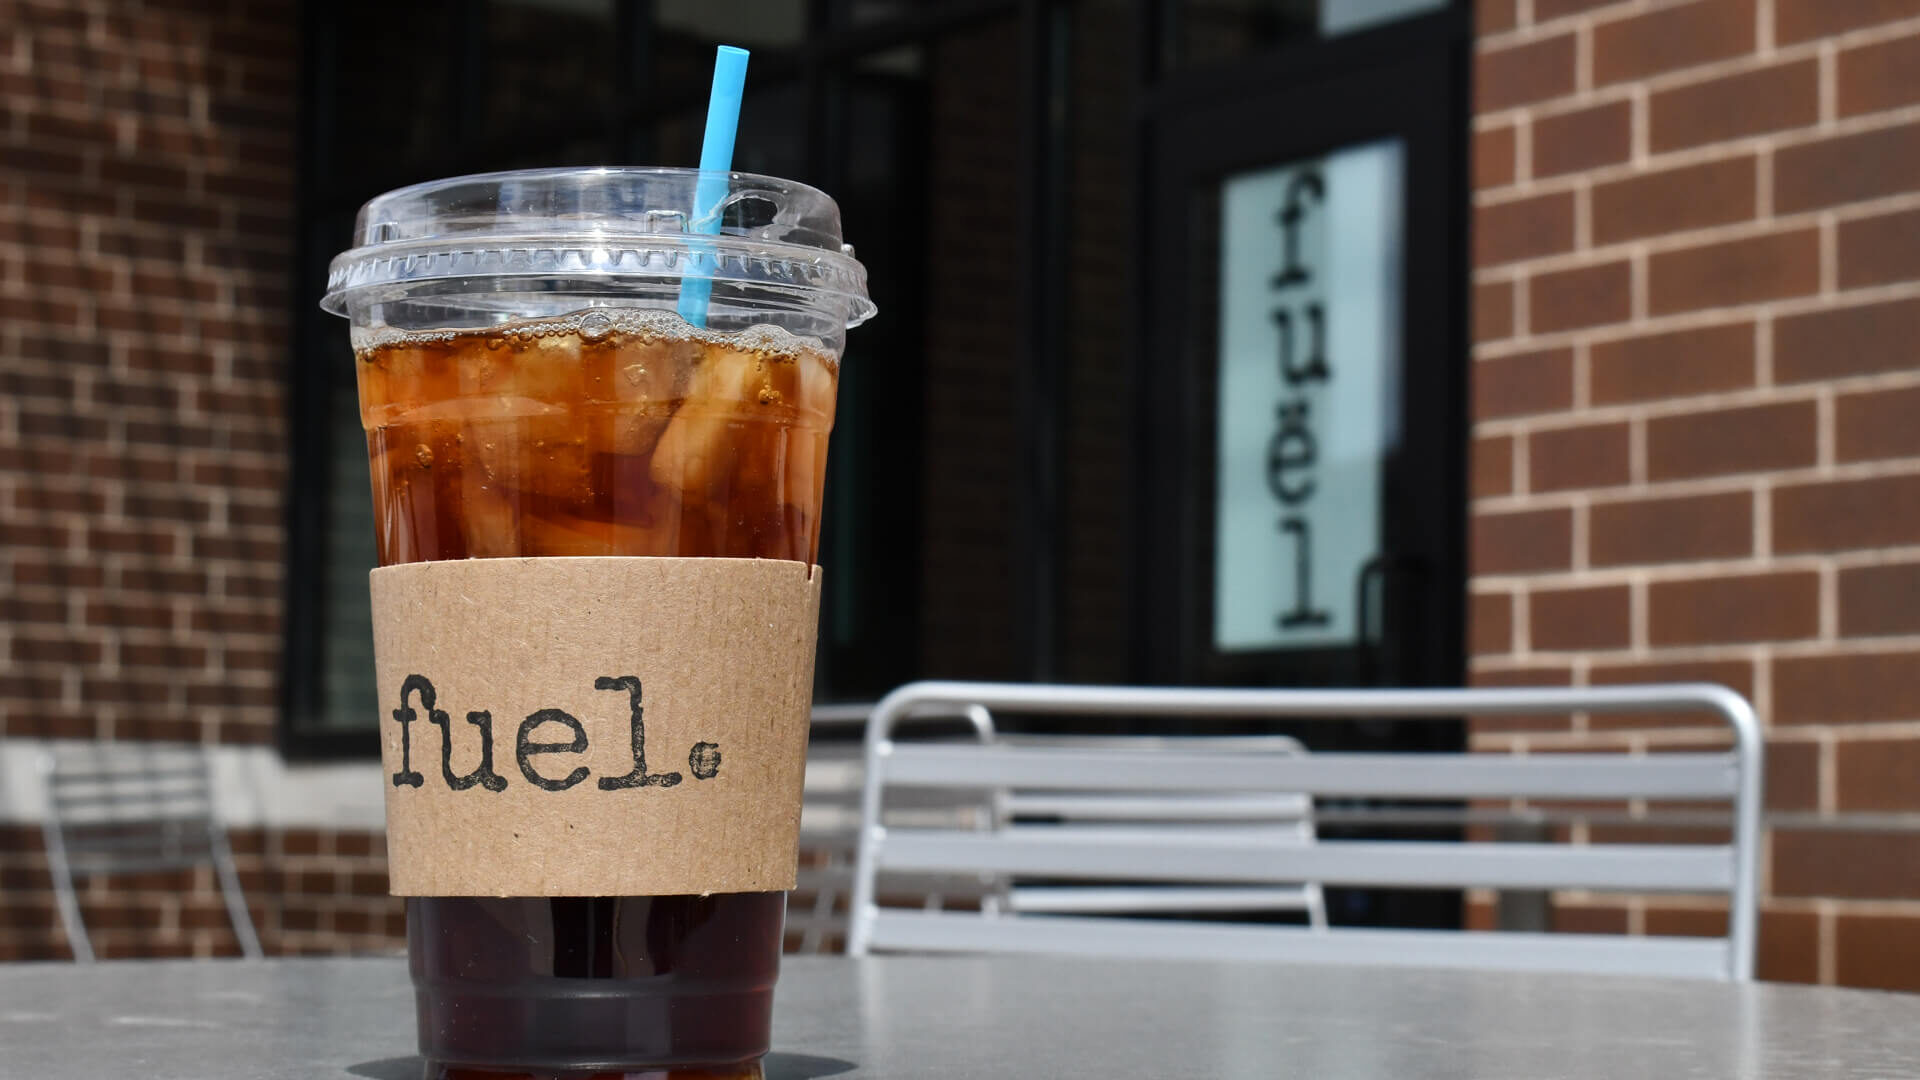 A large ice coffee with a blue straw sits on a cafe table outside of the Fuel coffee shop.